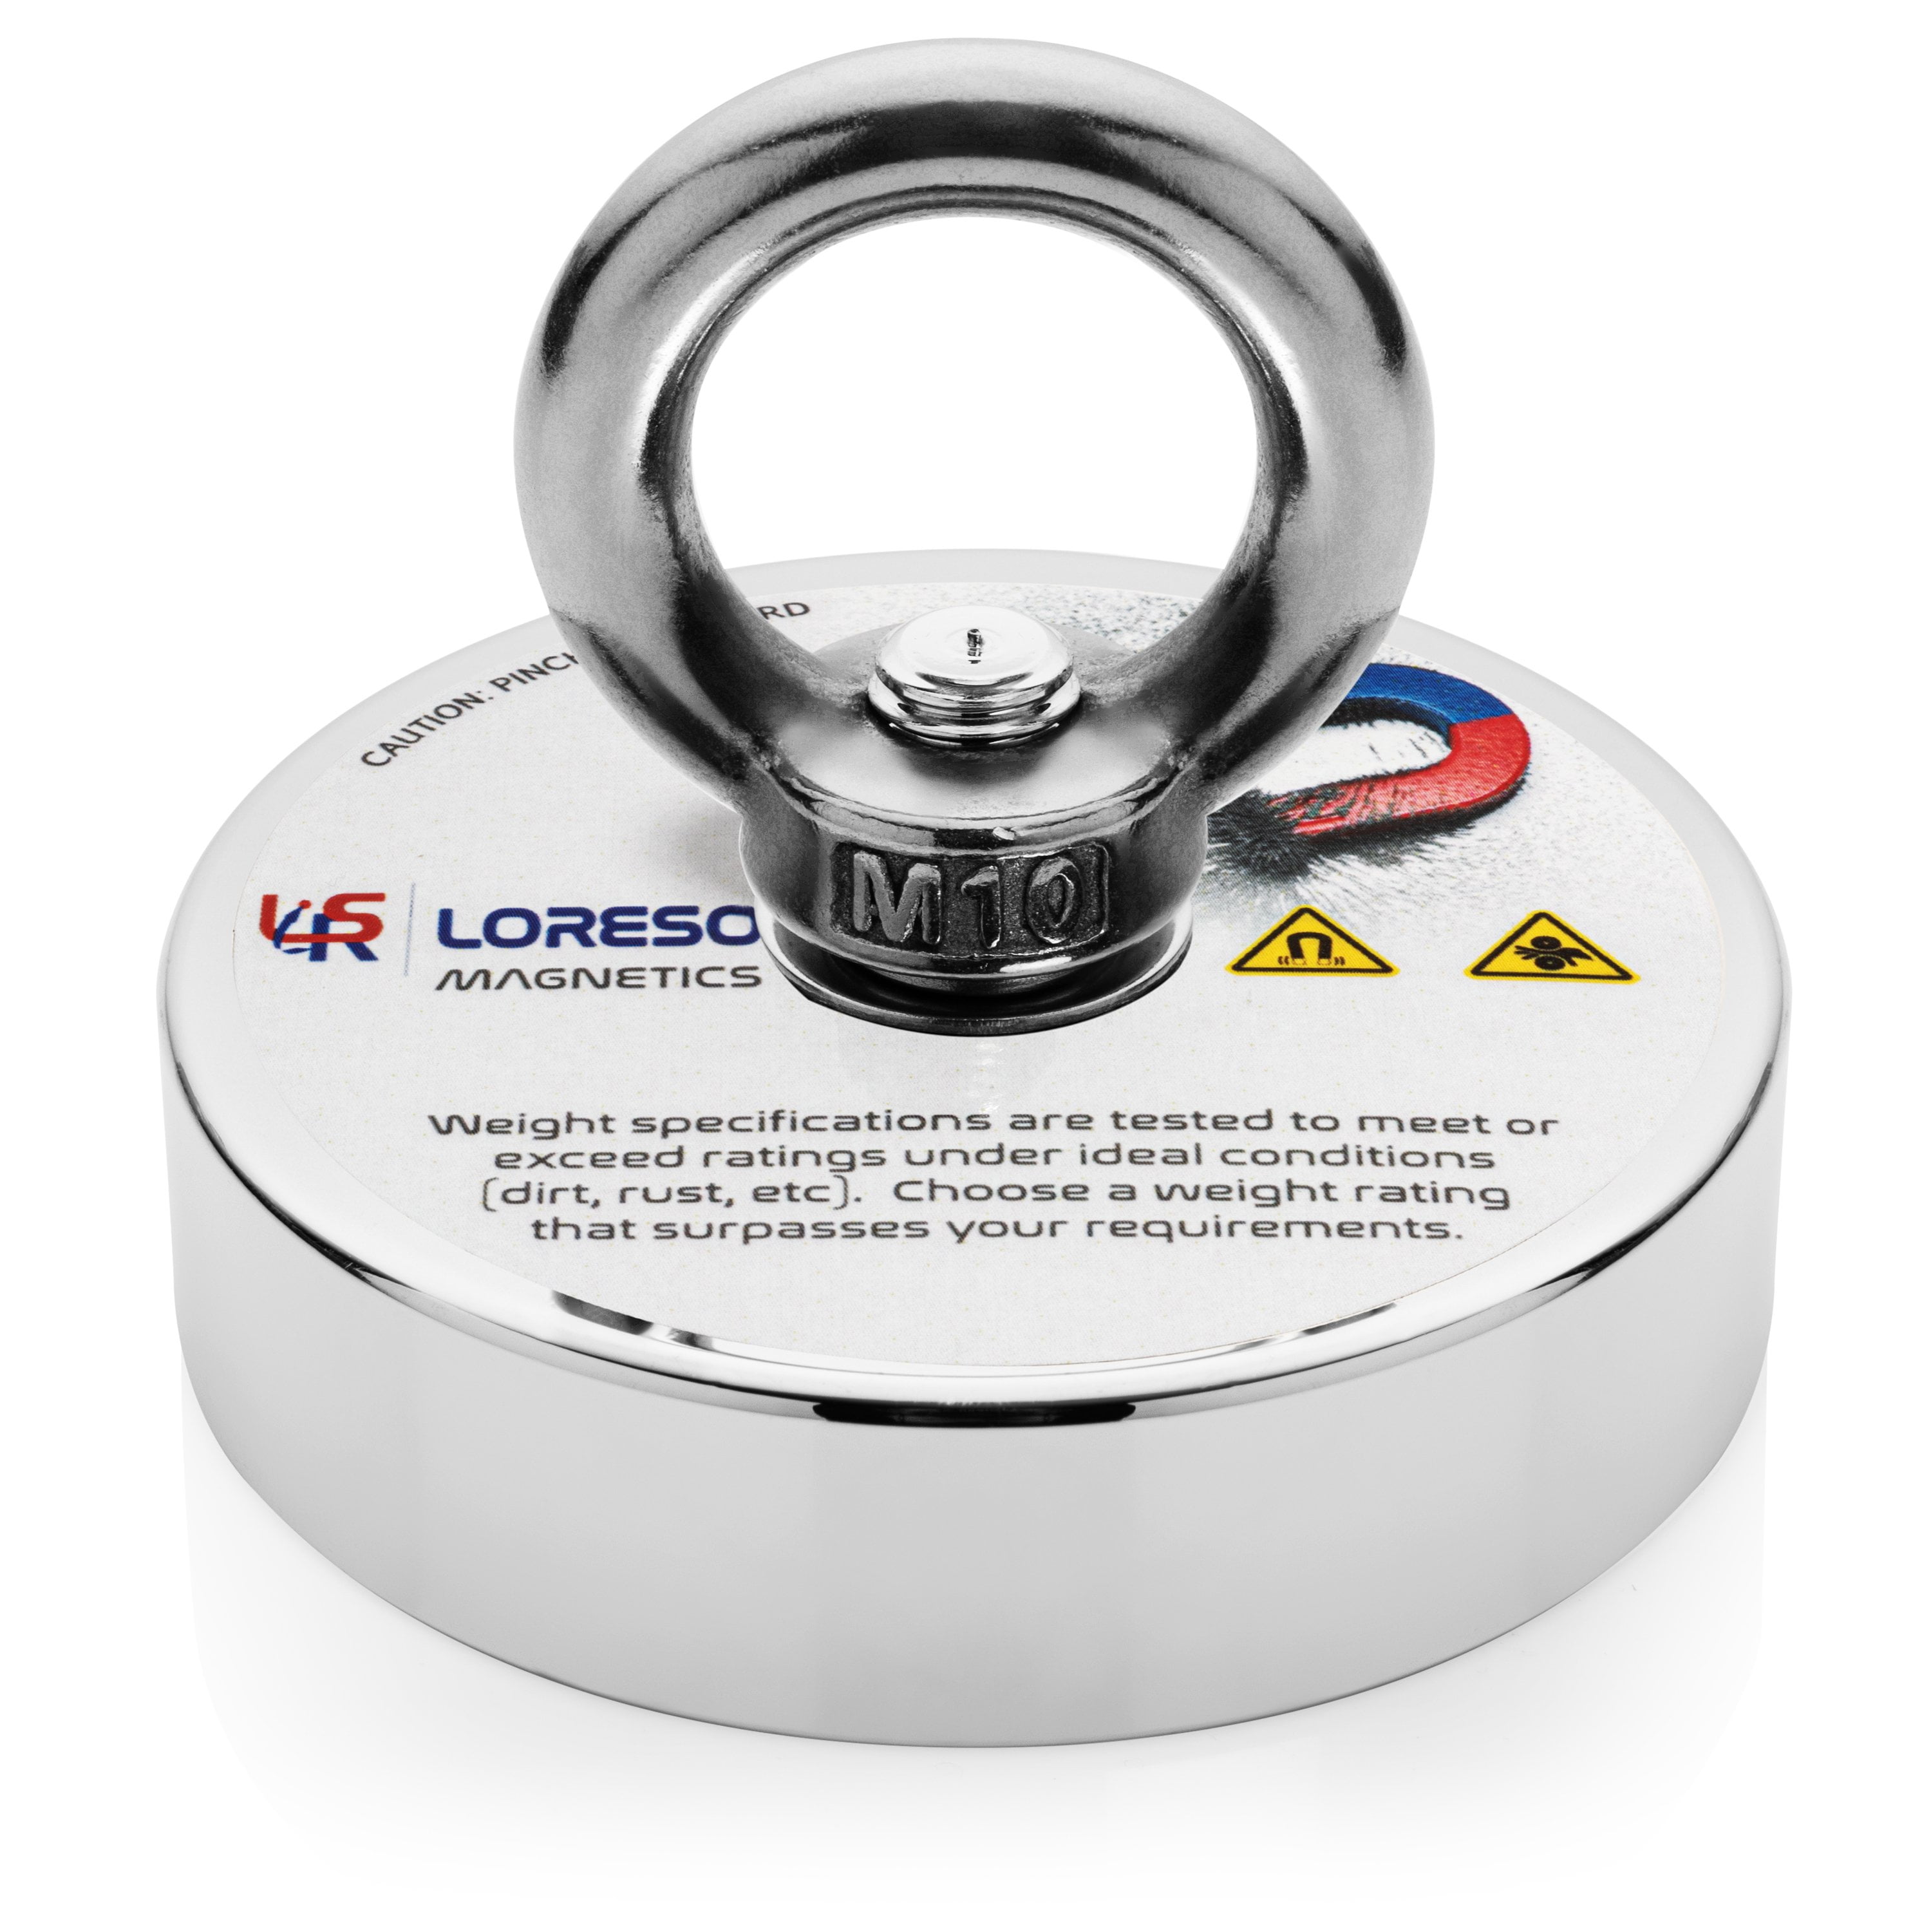 Loreso Fishing Magnet 550lb - Strong Neodymium Salvage Magnet with Powerful Rare Earth Magnet for Magnet Fishing with Magnetic Pulling Force of 550 Pounds ( 250 KG ) - Walmart.com